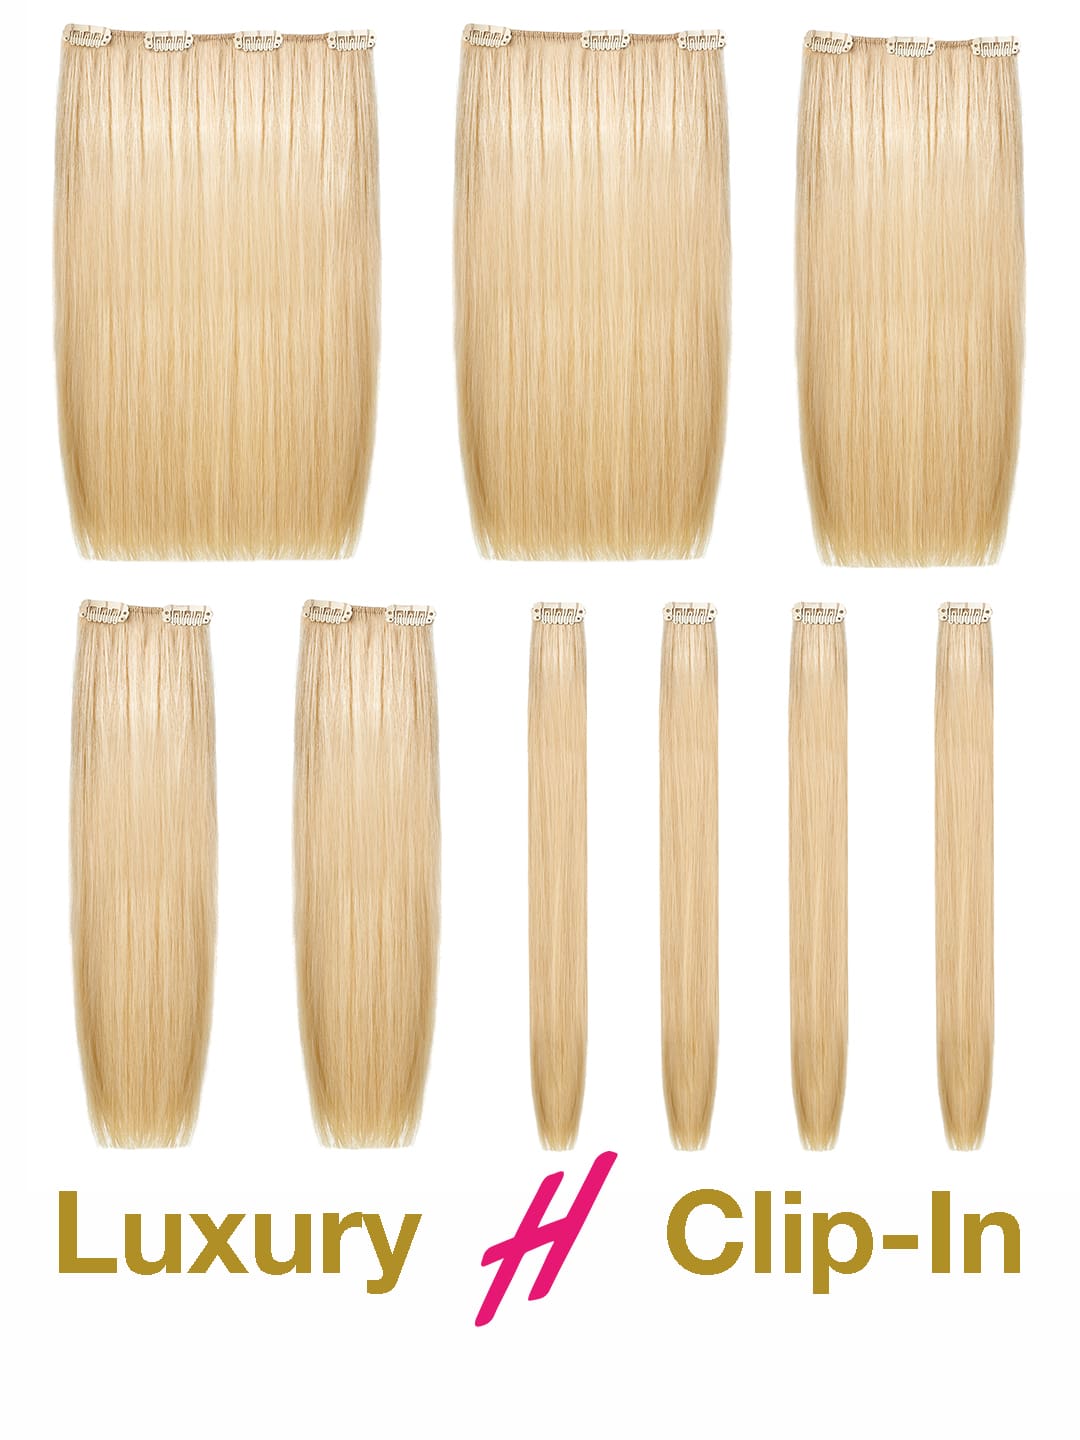 Clip in Extensions - luxury Qualität - Big Volume 9-teilig product image - 6d6c239f8333b9bcac1cd90fce5782921aa3f6afb0e8825343af31249c59eb00